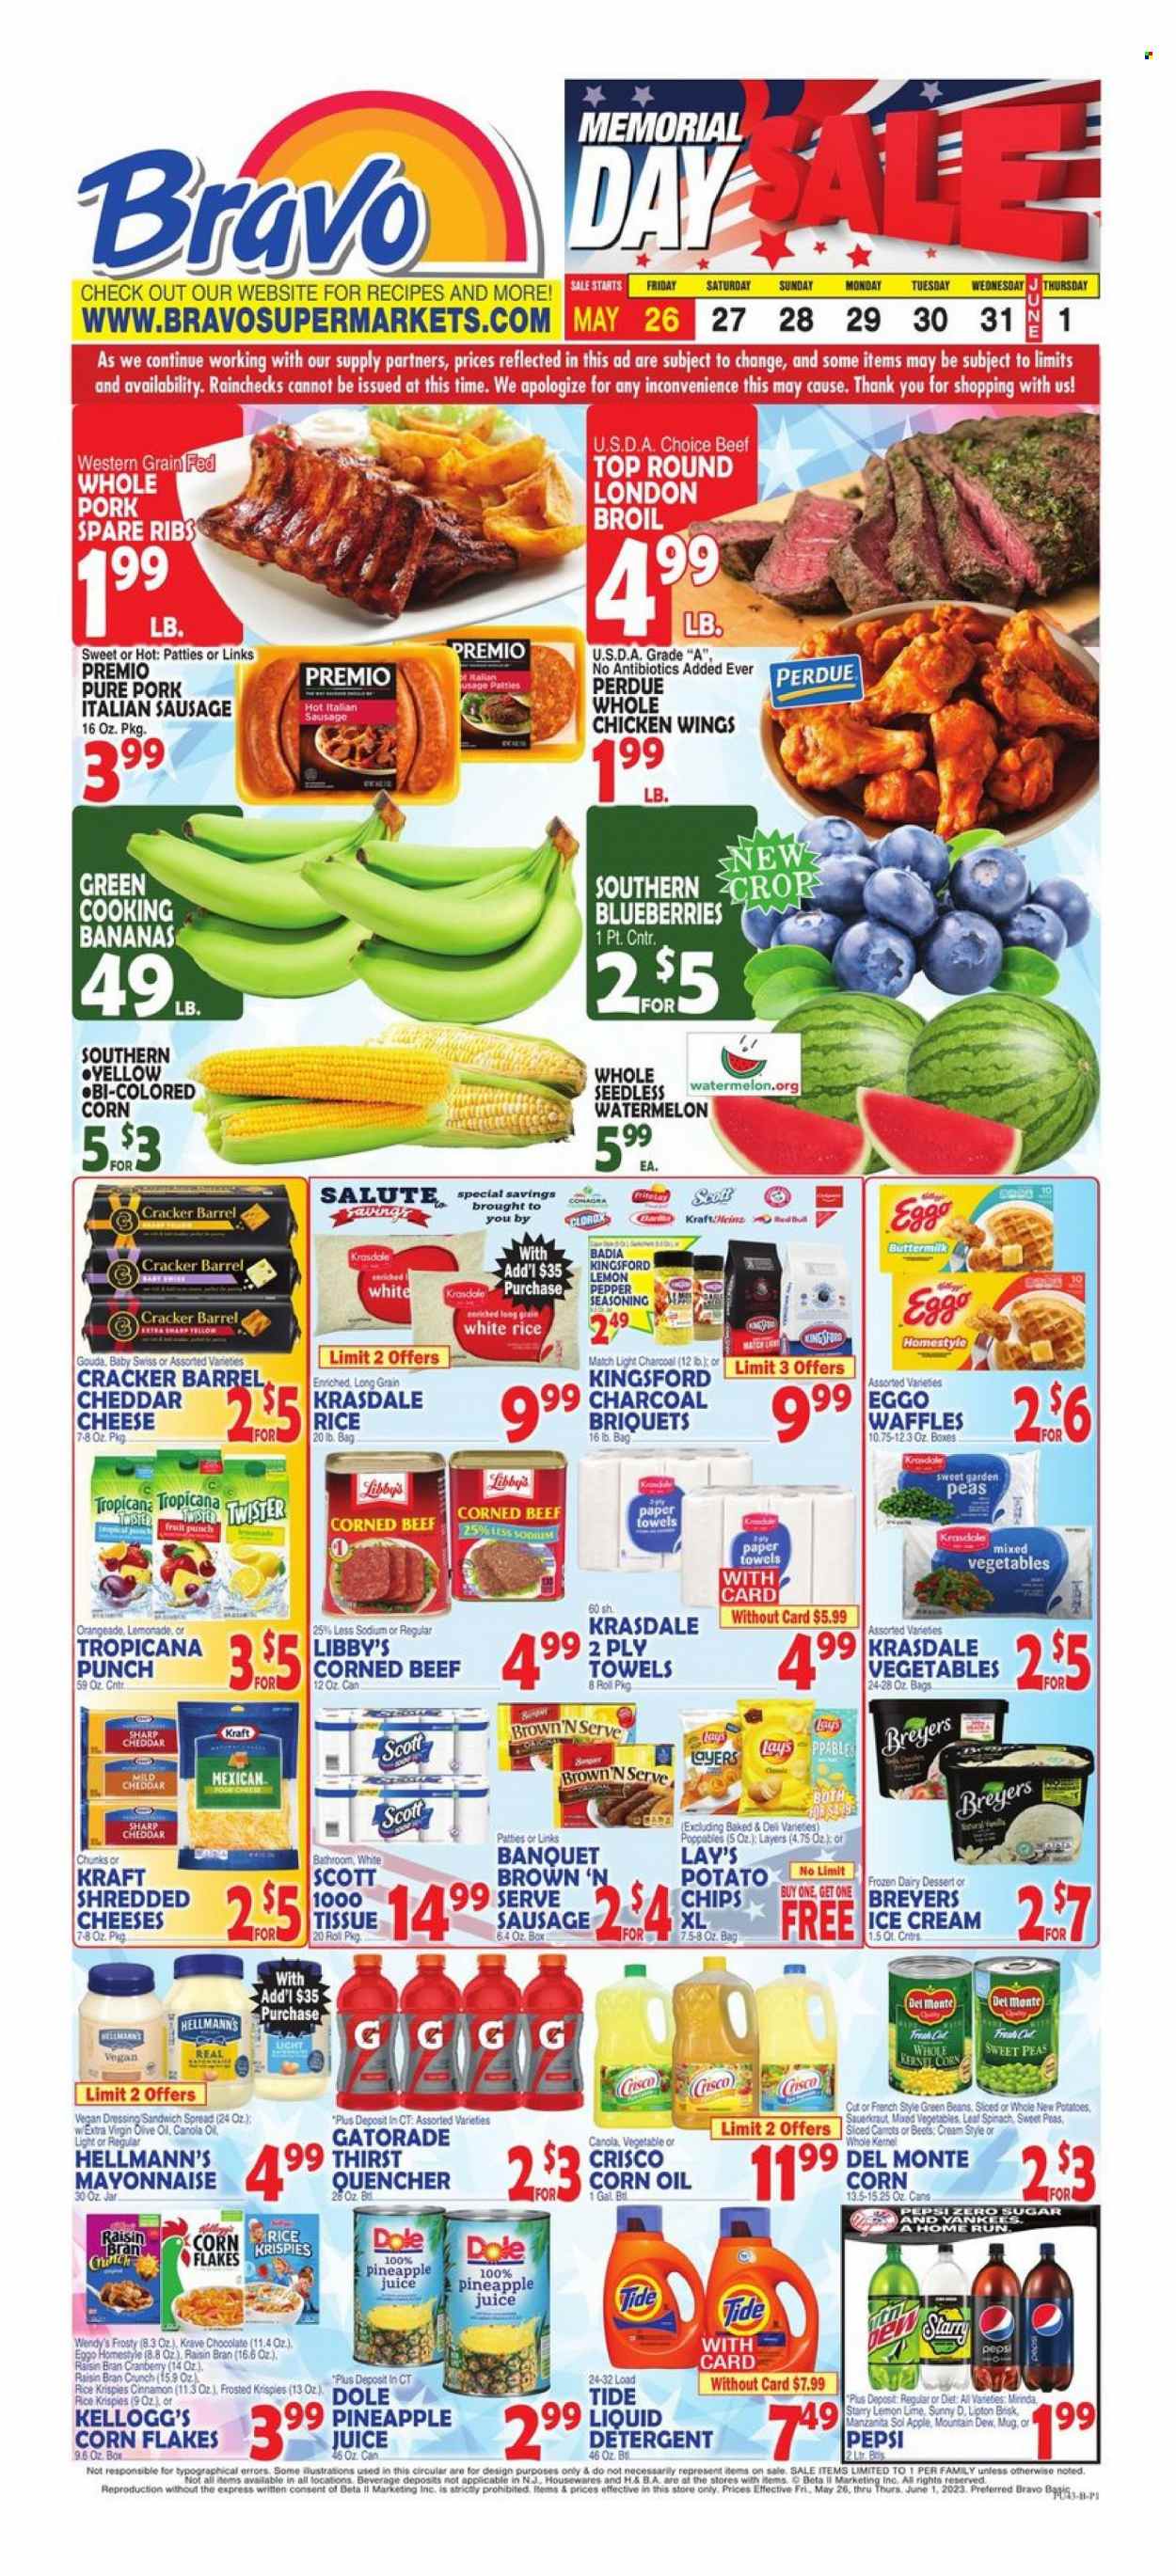 thumbnail - Bravo Supermarkets Flyer - 05/26/2023 - 06/01/2023 - Sales products - waffles, dessert, beans, carrots, green beans, spinach, Dole, blueberries, pineapple, sandwich, Perdue®, Kraft®, Kingsford, sausage, italian sausage, corned beef, gouda, mild cheddar, cheese, buttermilk, mayonnaise, Hellmann’s, ice cream, mixed vegetables, chicken wings, crackers, Kellogg's, potato chips, Lay’s, Crisco, sauerkraut, Badia, Del Monte, pickled cabbage, corn flakes, Rice Krispies, Raisin Bran, white rice, spice, cinnamon, dressing, corn oil, extra virgin olive oil, olive oil, lemonade, Mountain Dew, pineapple juice, Pepsi, juice, energy drink, Lipton, soft drink, Red Bull, Gatorade, fruit punch, Sol, whole chicken, chicken, beef meat, ribs, pork meat, pork ribs, pork spare ribs, Scott, tissues, kitchen towels, paper towels, detergent, Clorox, Tide, liquid detergent. Page 3.